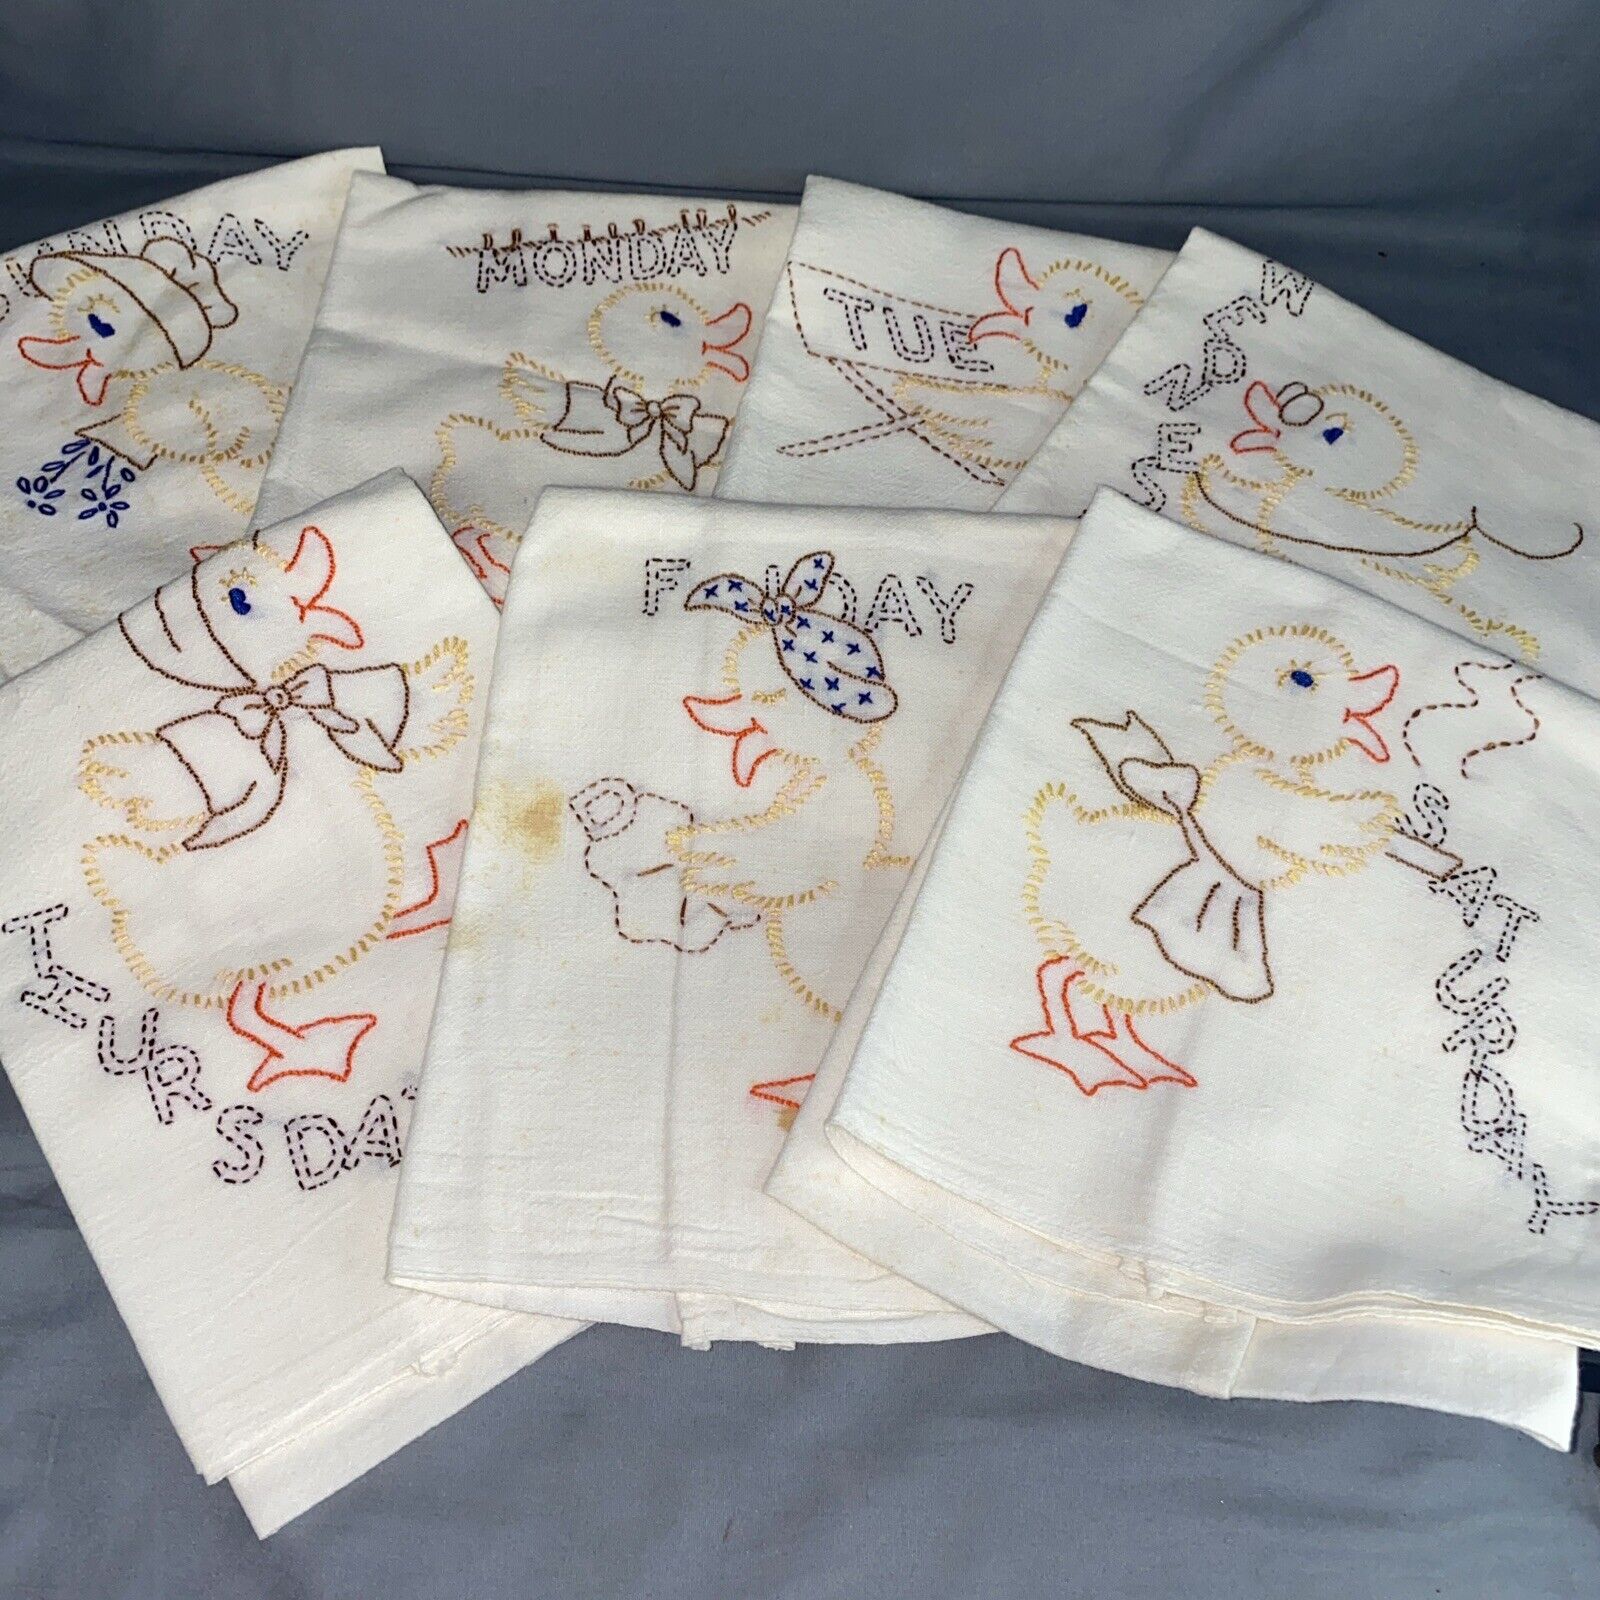 Lot of 7 Vintage Embroidery Kitchen Tea Towels Embroidered Ducks Days Of Week